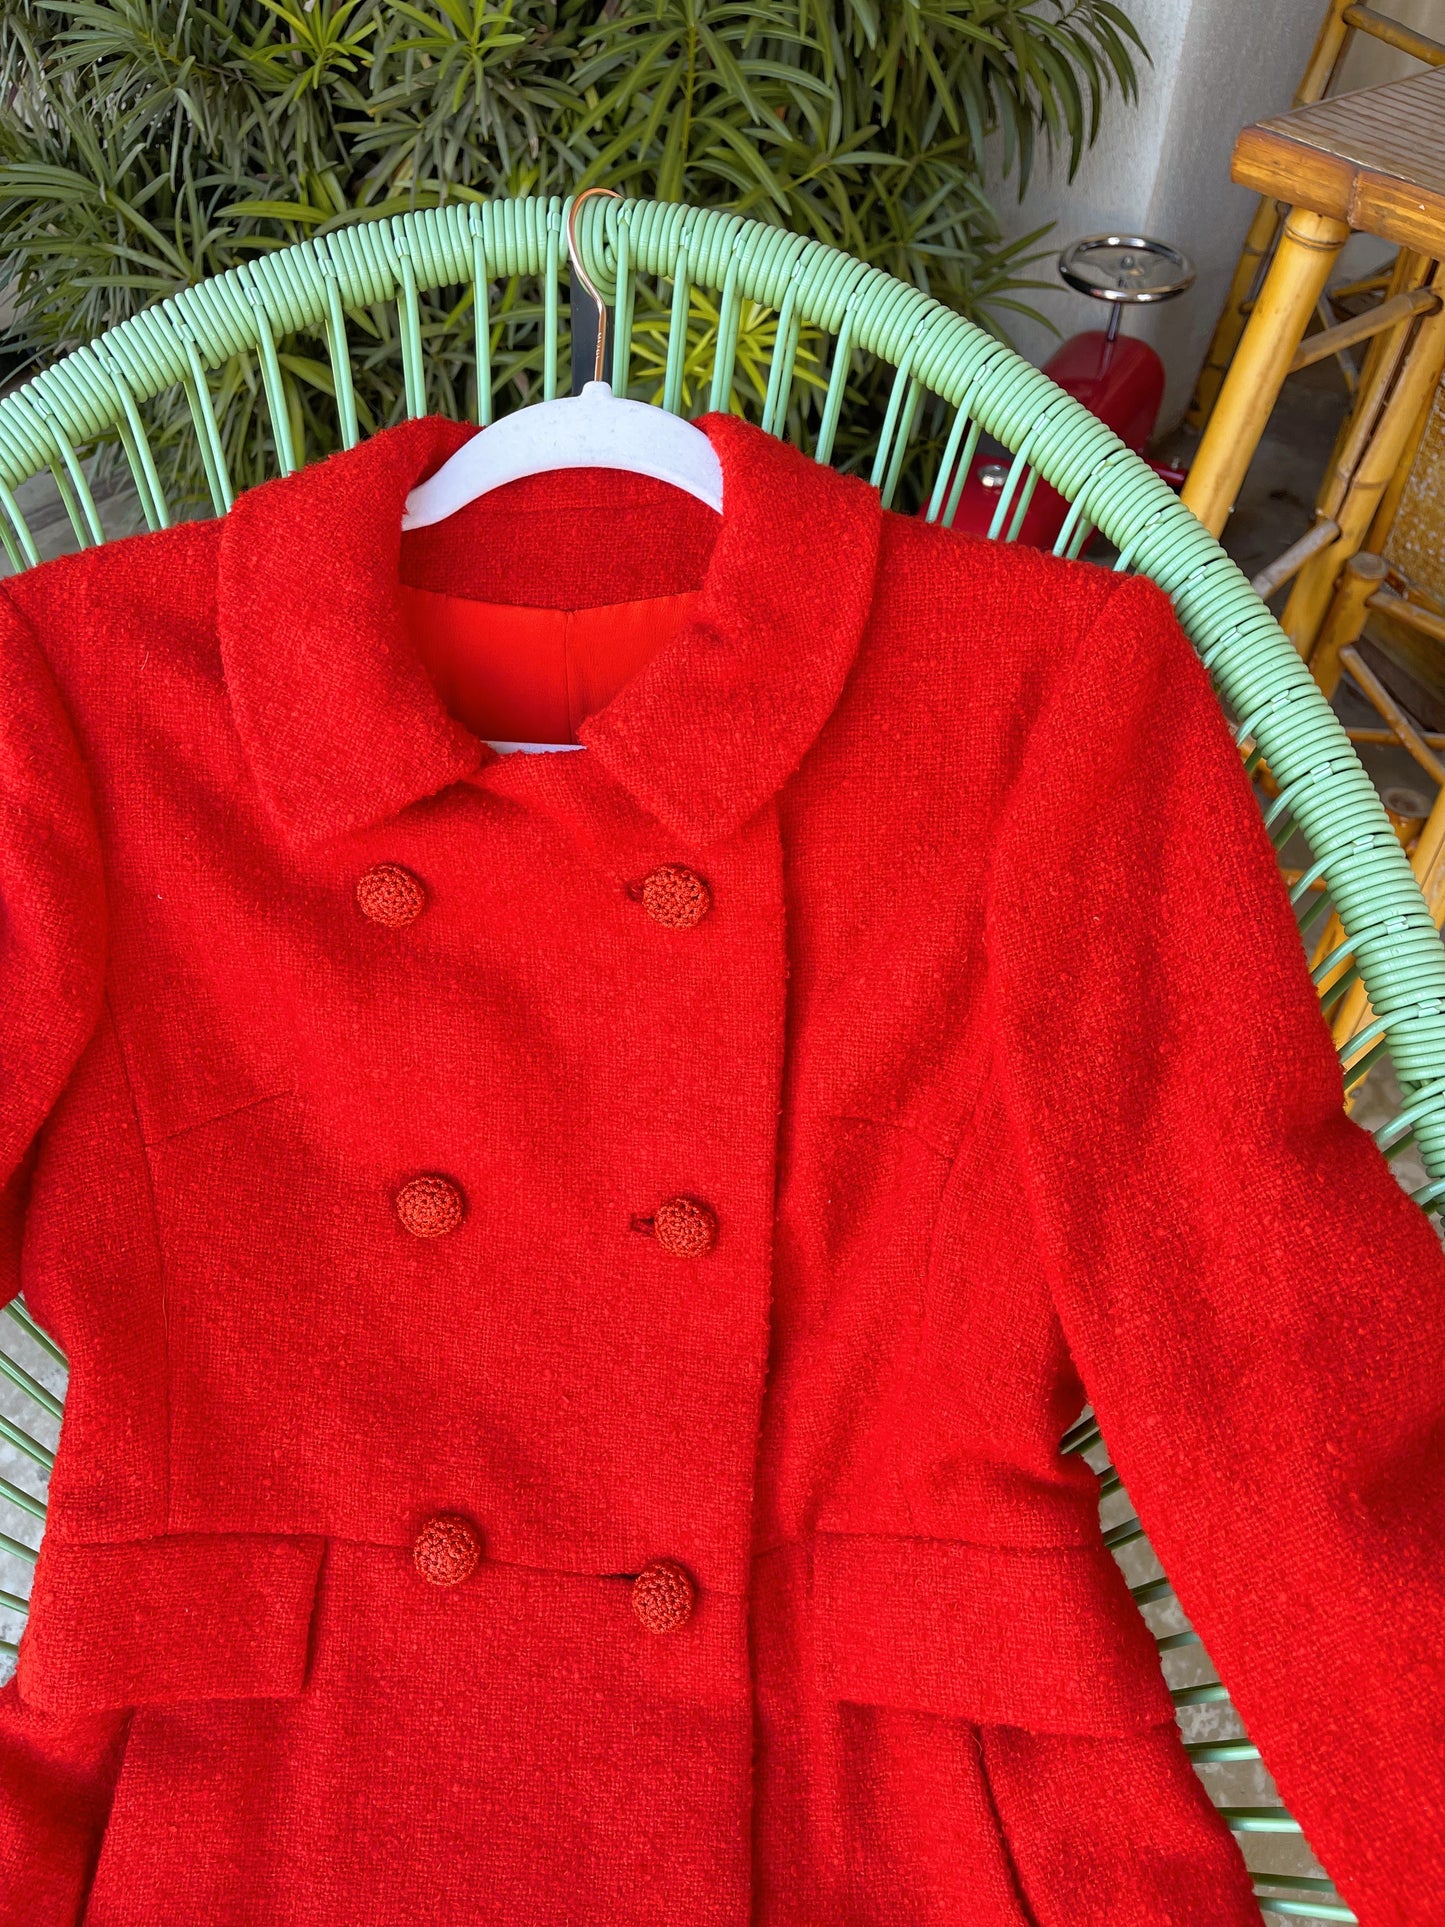 Vintage 60s / 70s Candy Apple Tweed Double Breasted Coat Fits Sizes S-M